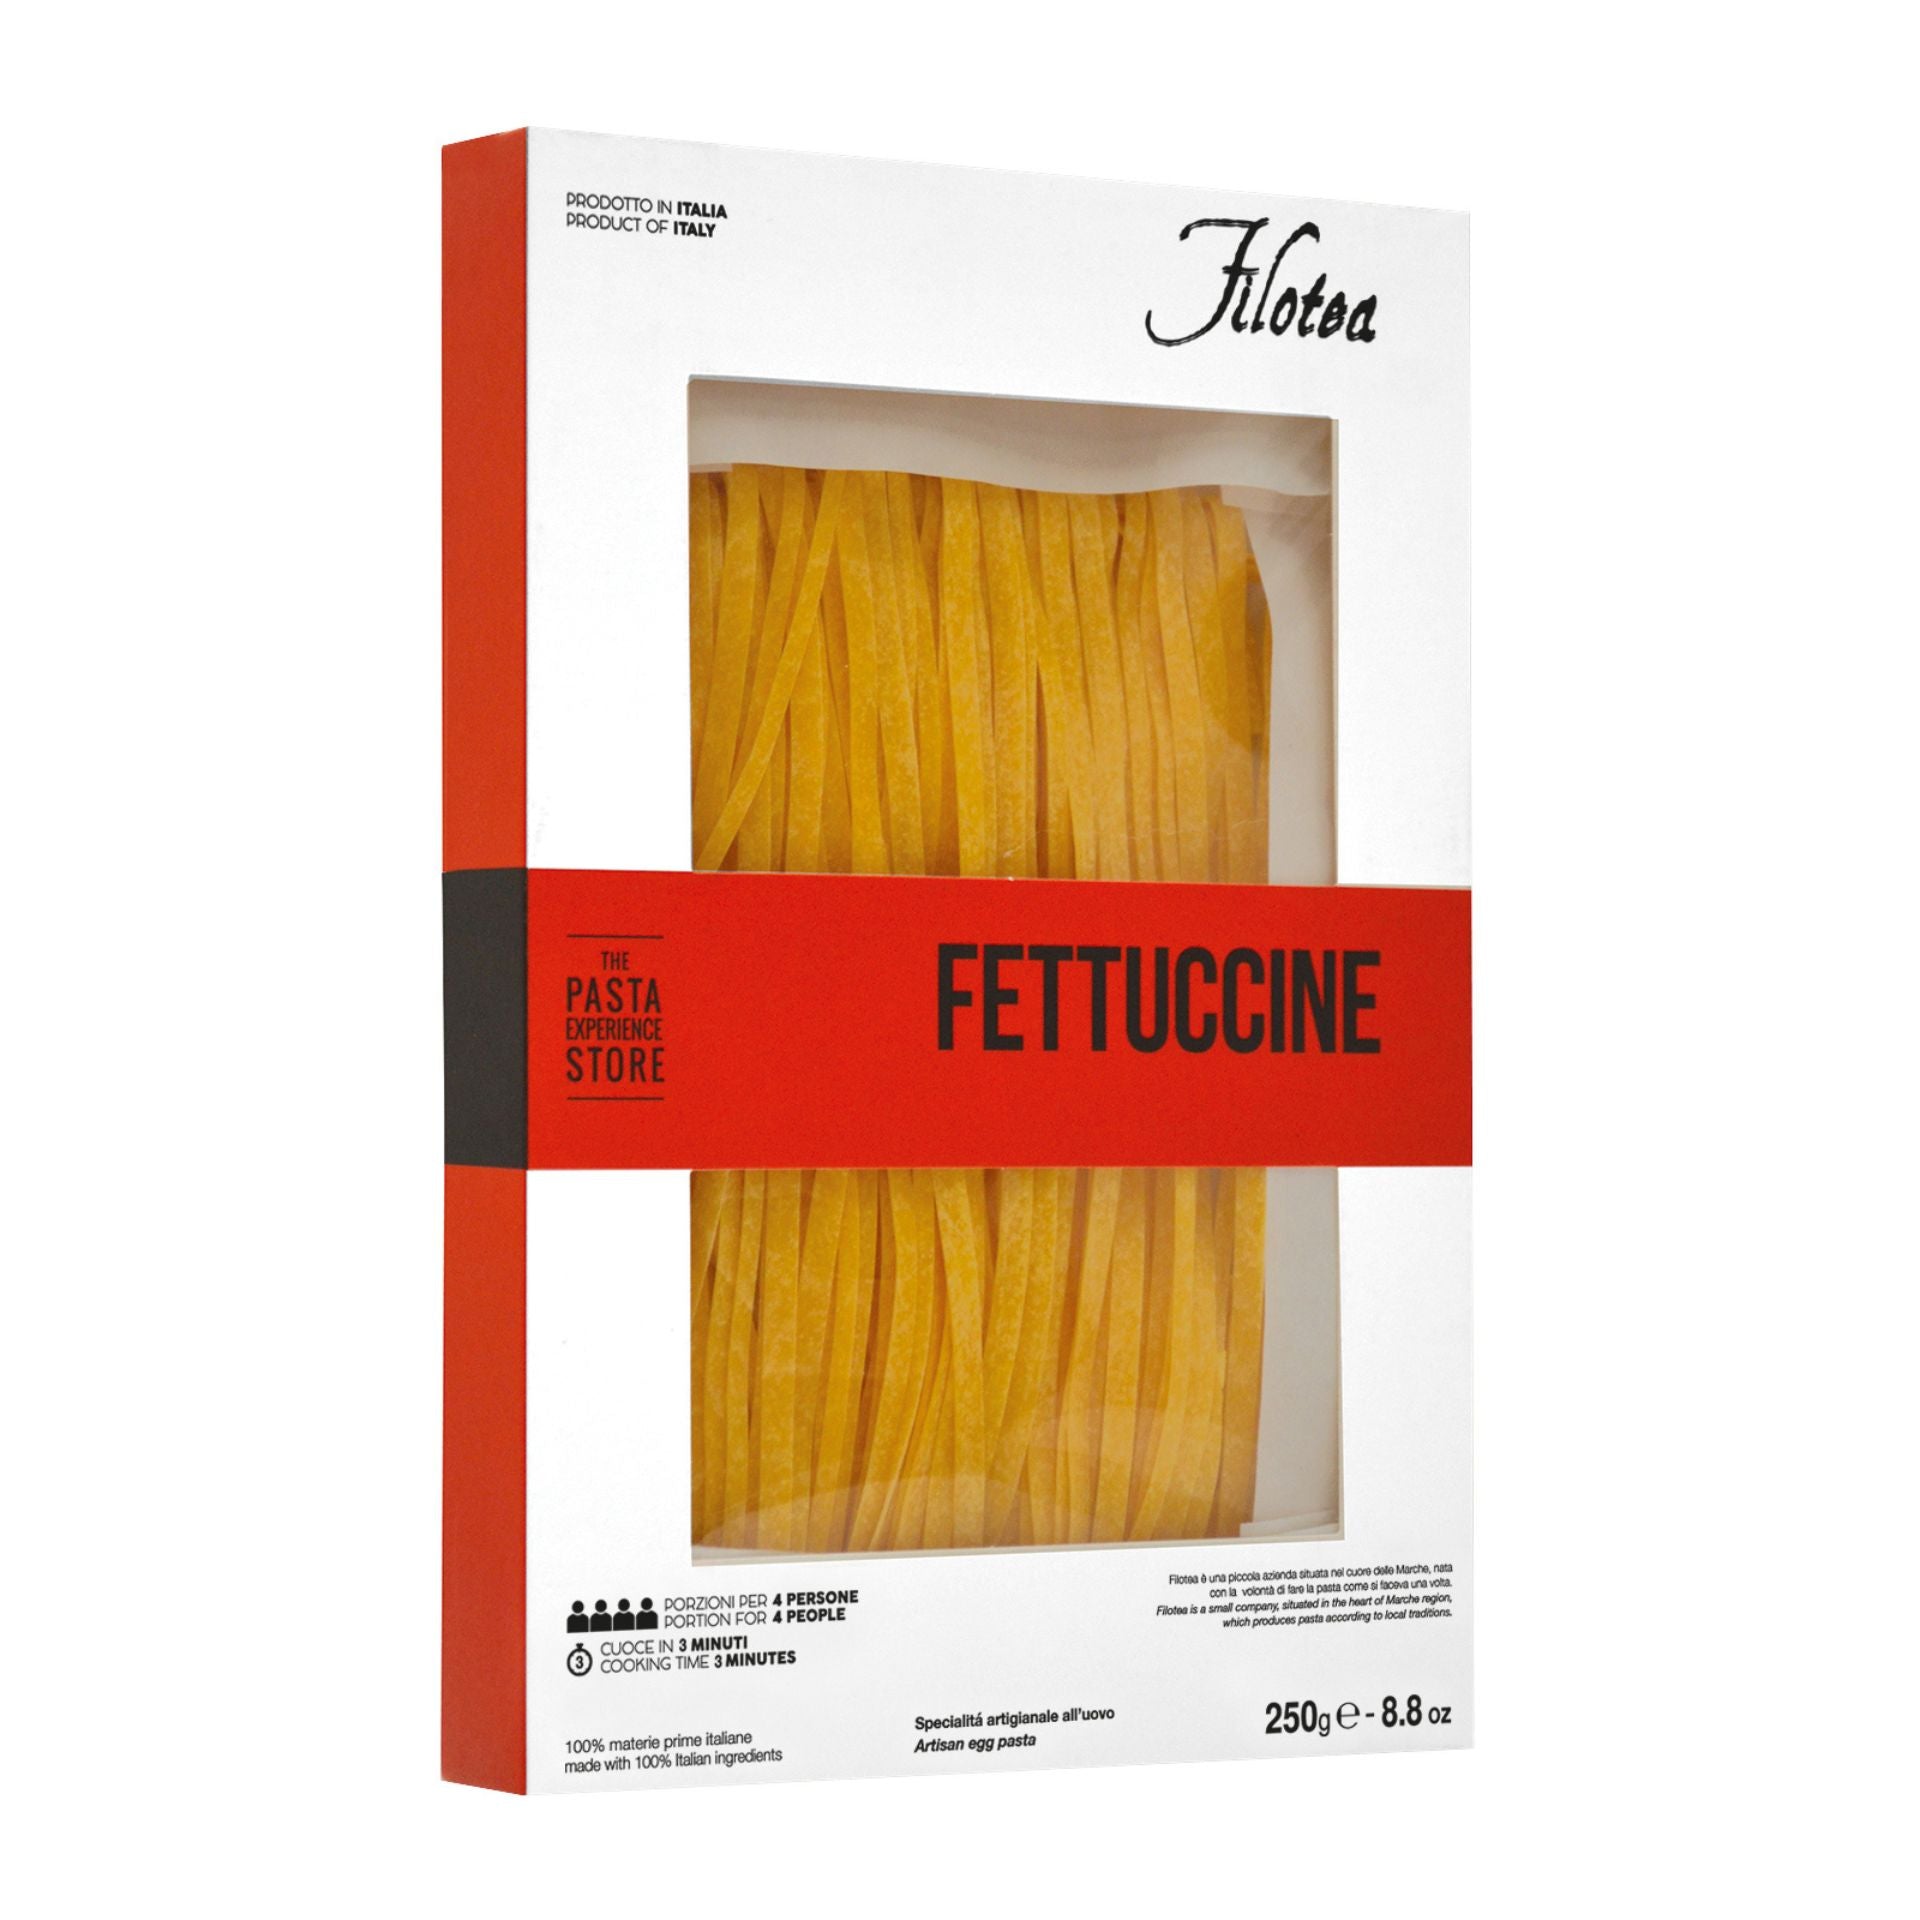 Filotea Fettuccine Artisan Egg Pasta 250g  | Imported and distributed in the UK by Just Gourmet Foods